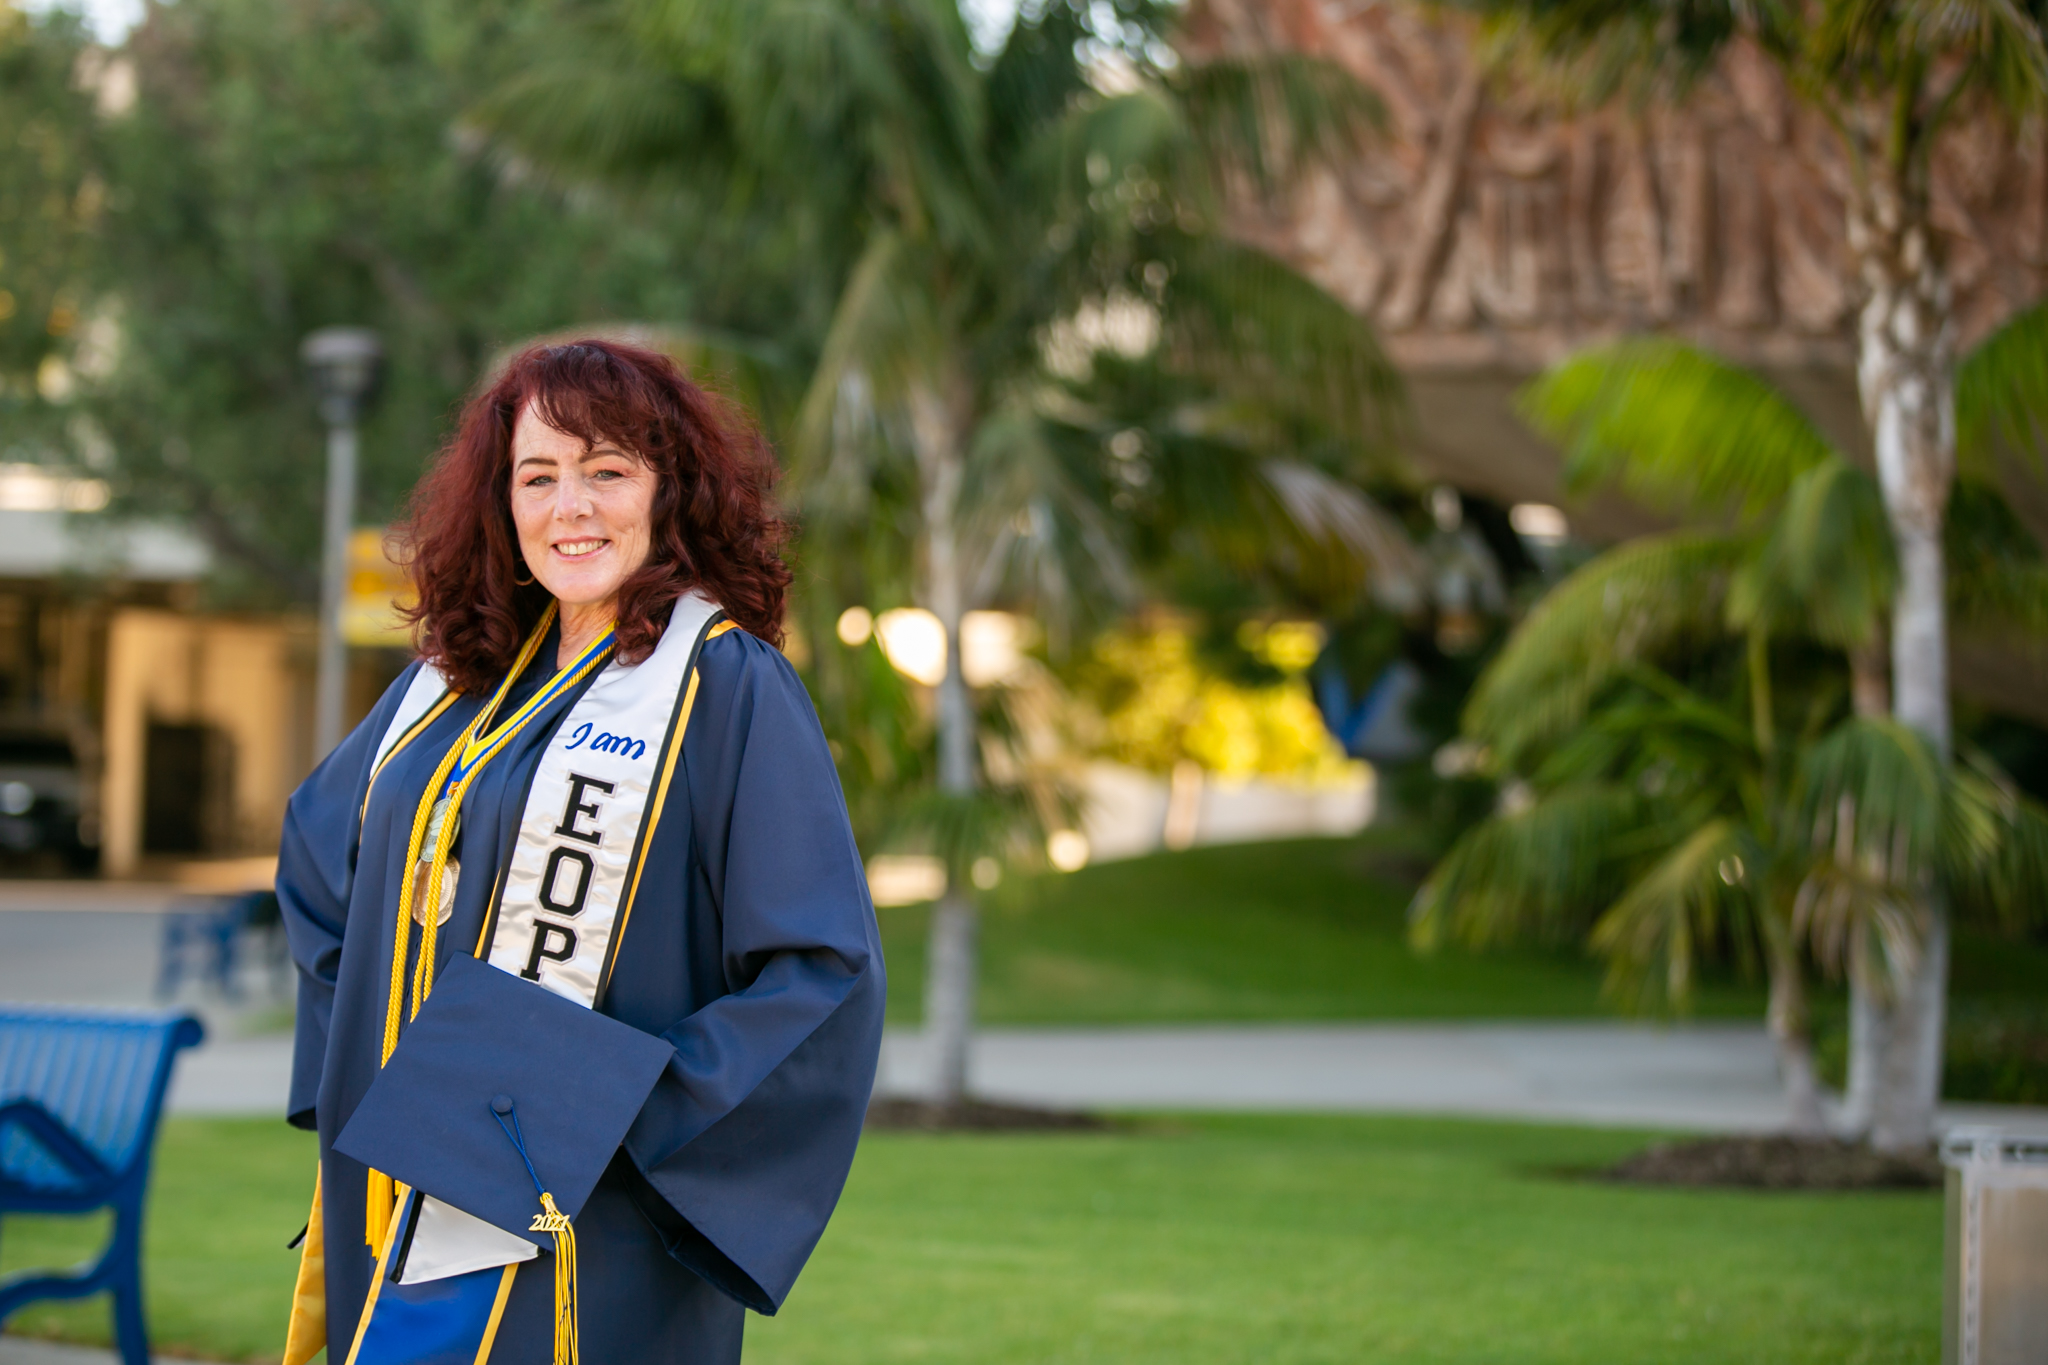 Lisa Plechner poses in graduation regalia outside a Cypress College building.